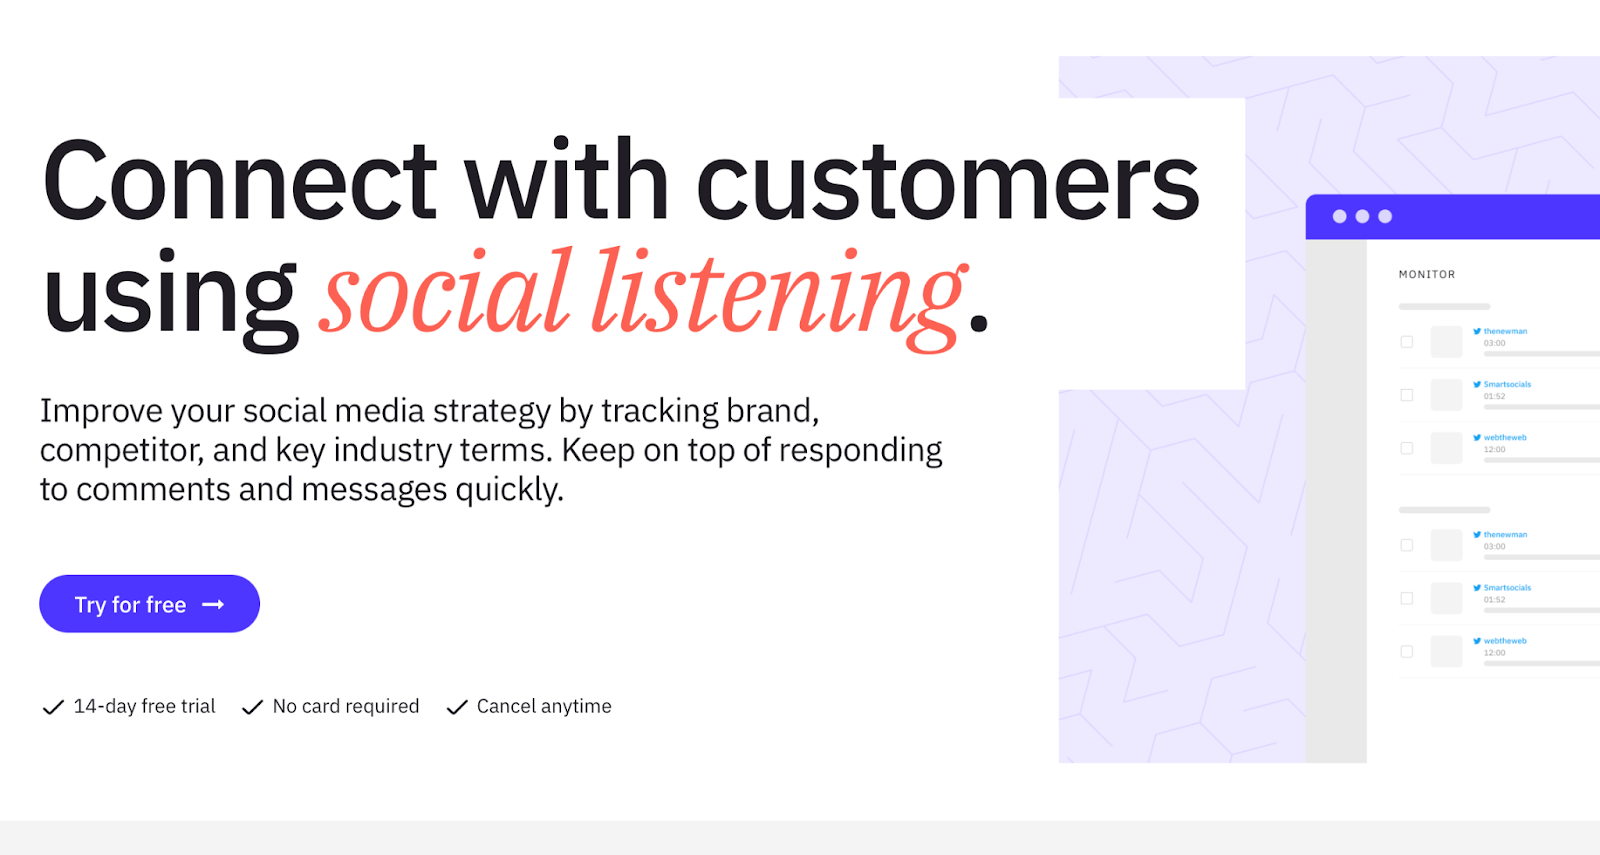 A section taken from a Sendible wepage. It shows how users can "Connect with customers using social listening". An image on the right side is an illustrated image of the platform's design. 